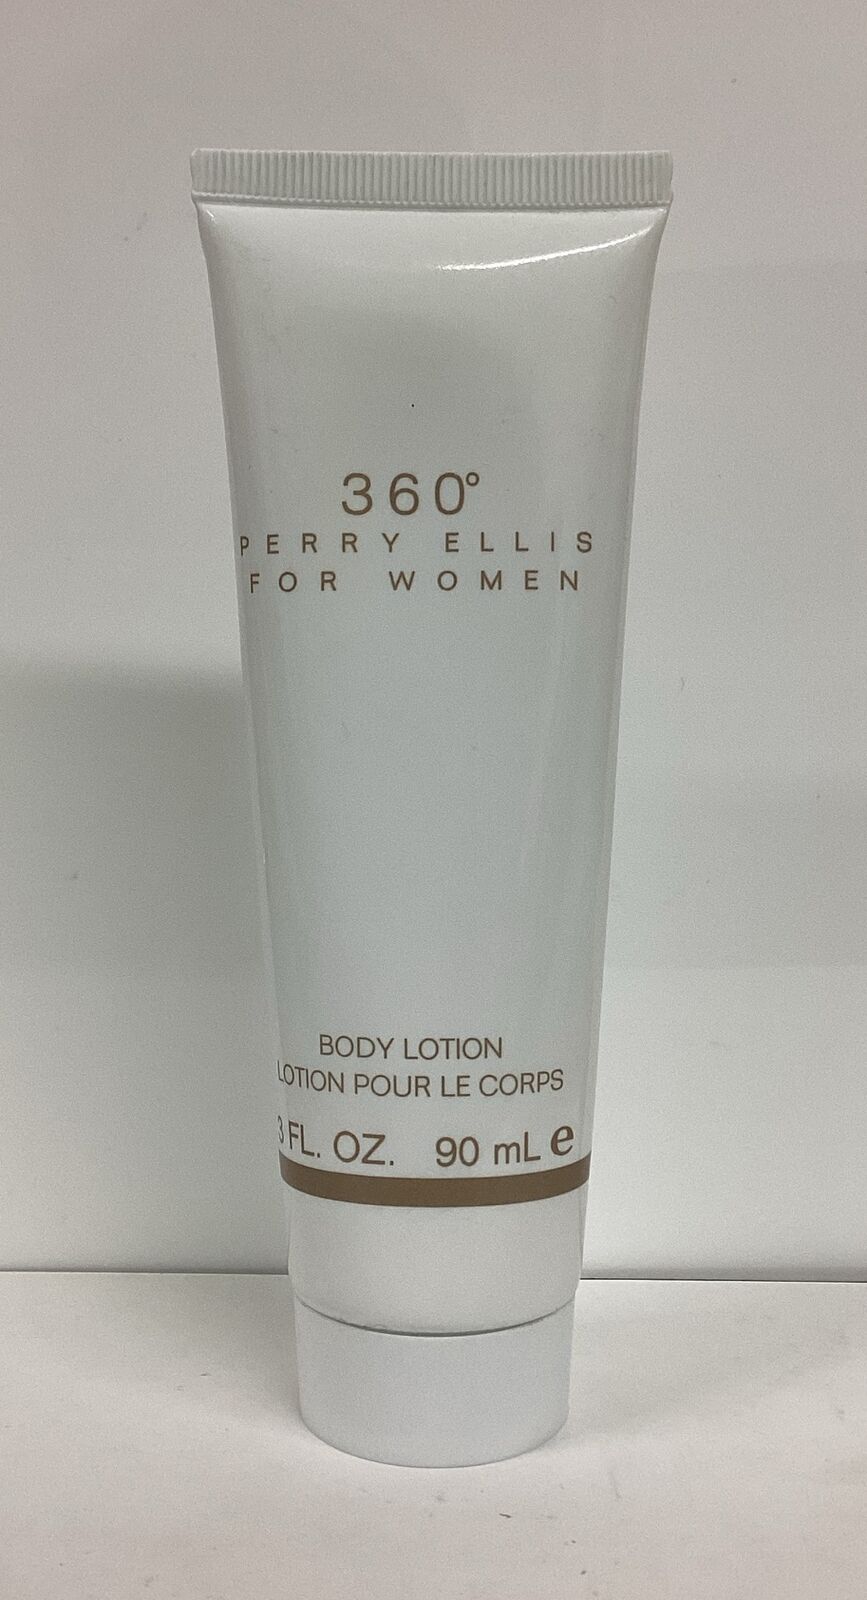 Perry Ellis 360 Body Lotion For Women 3oz As Pictured, No Box